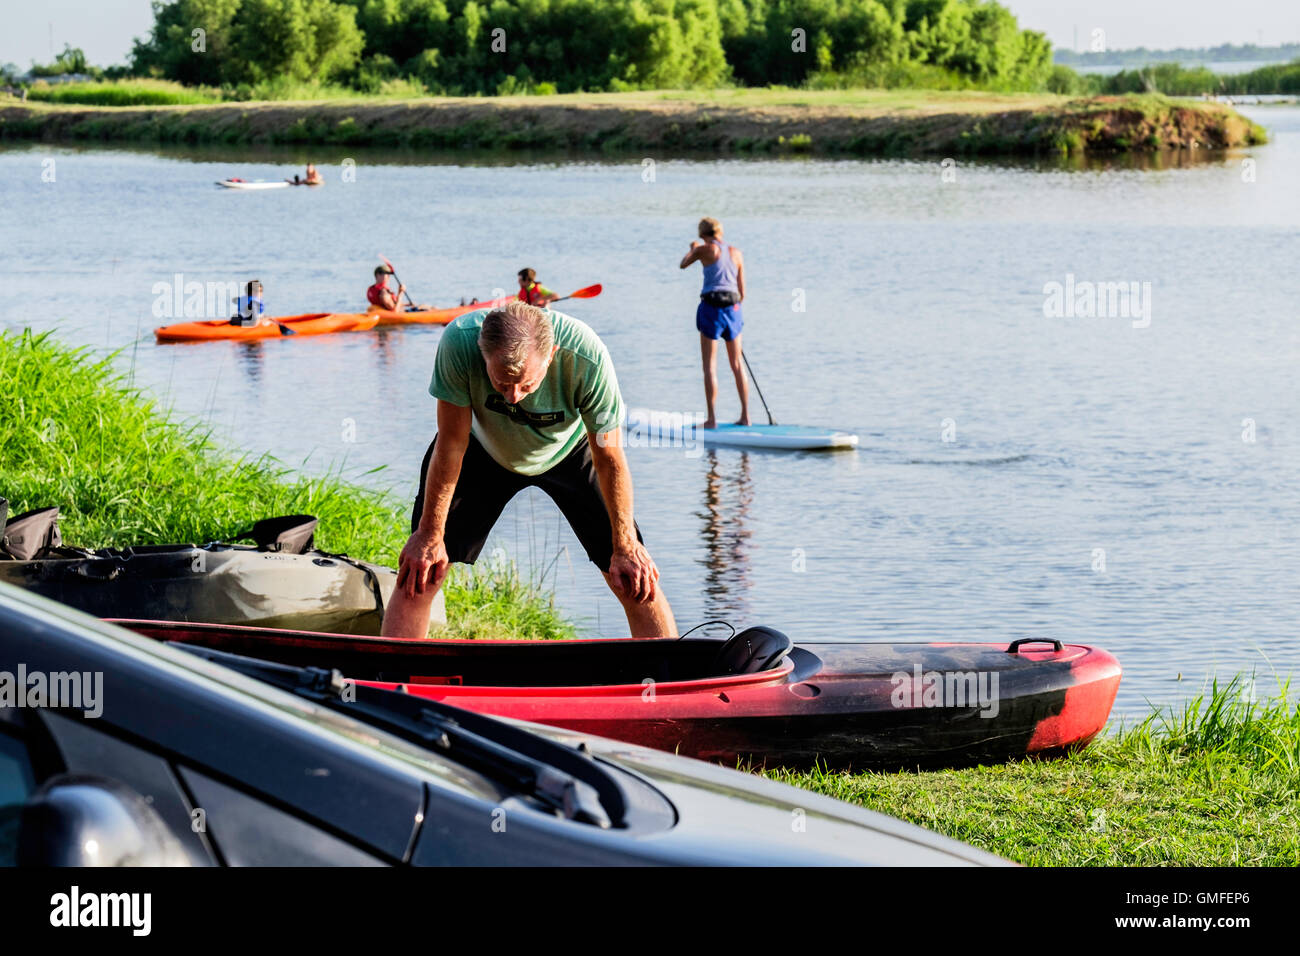 A middle aged Caucasian man looks over his kayak on shore while people play on a paddleboard and kayaks on a river. Stock Photo